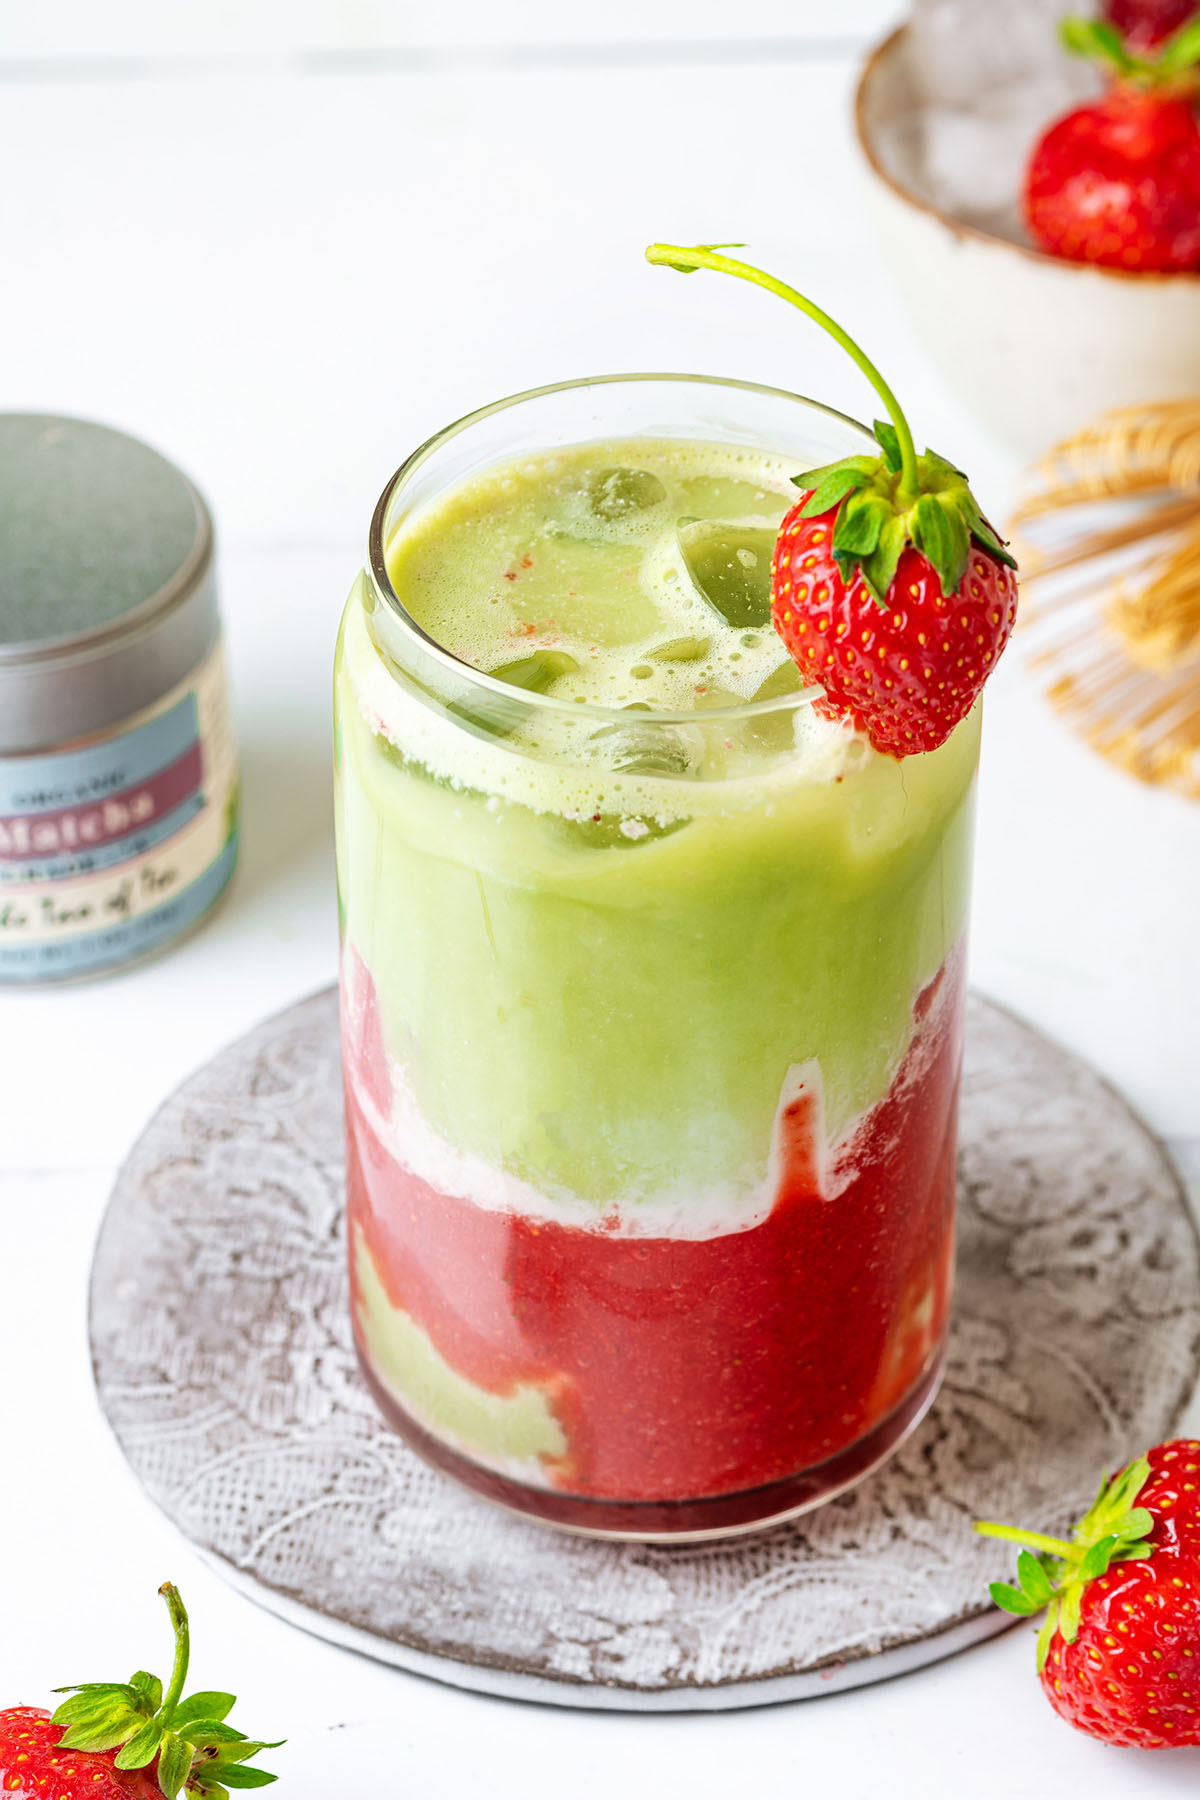 Iced matcha latte with layers of strawberry purree, milk